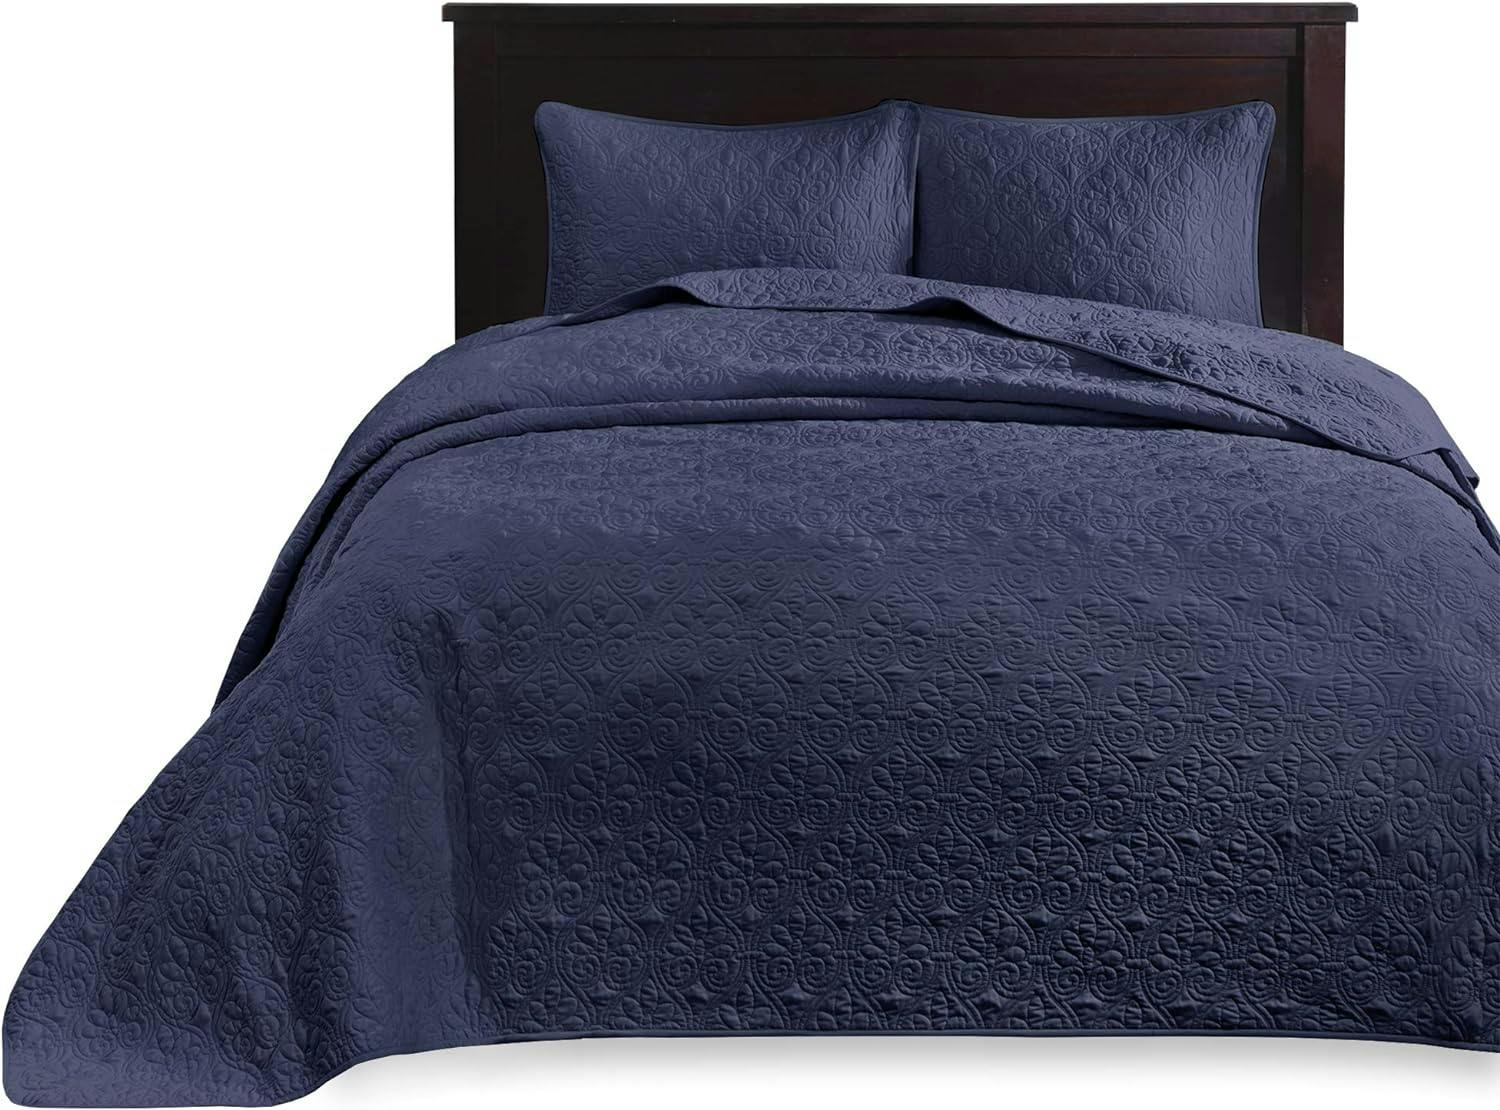 Navy King-Size Reversible Microfiber Bedspread Set with Classic Stitch